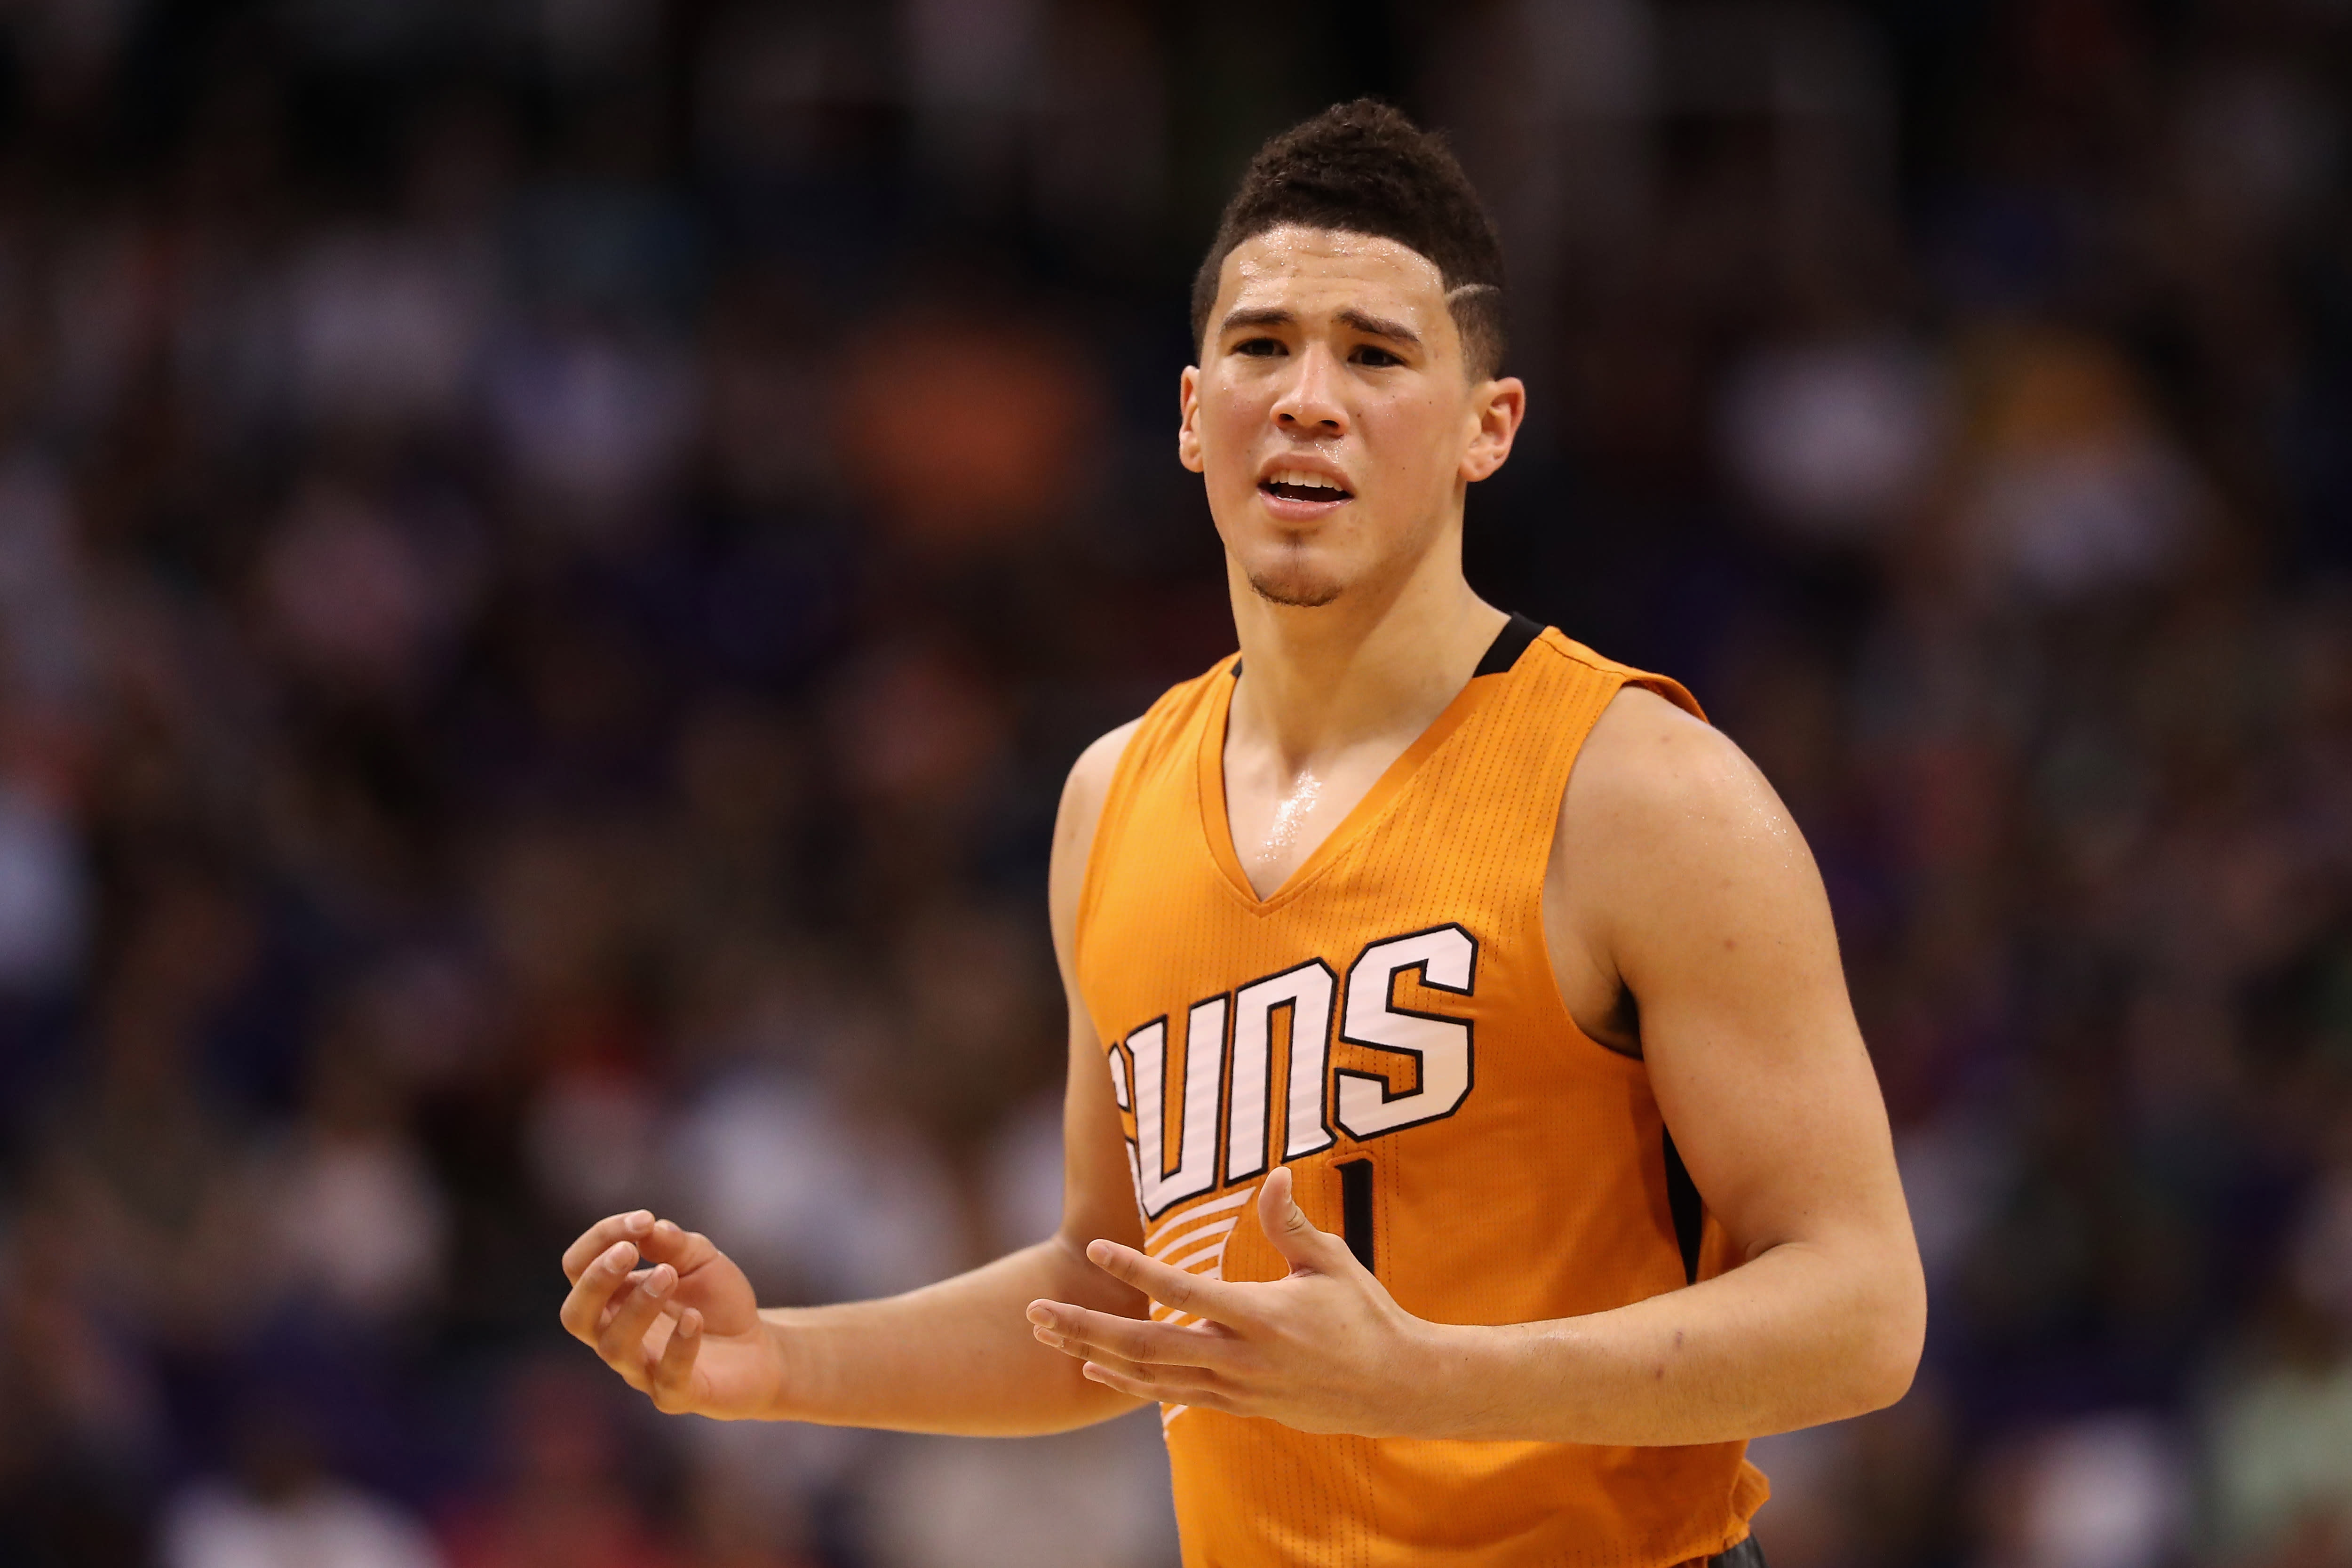 Suns' Booker makes history with 70 points in loss to Celtics